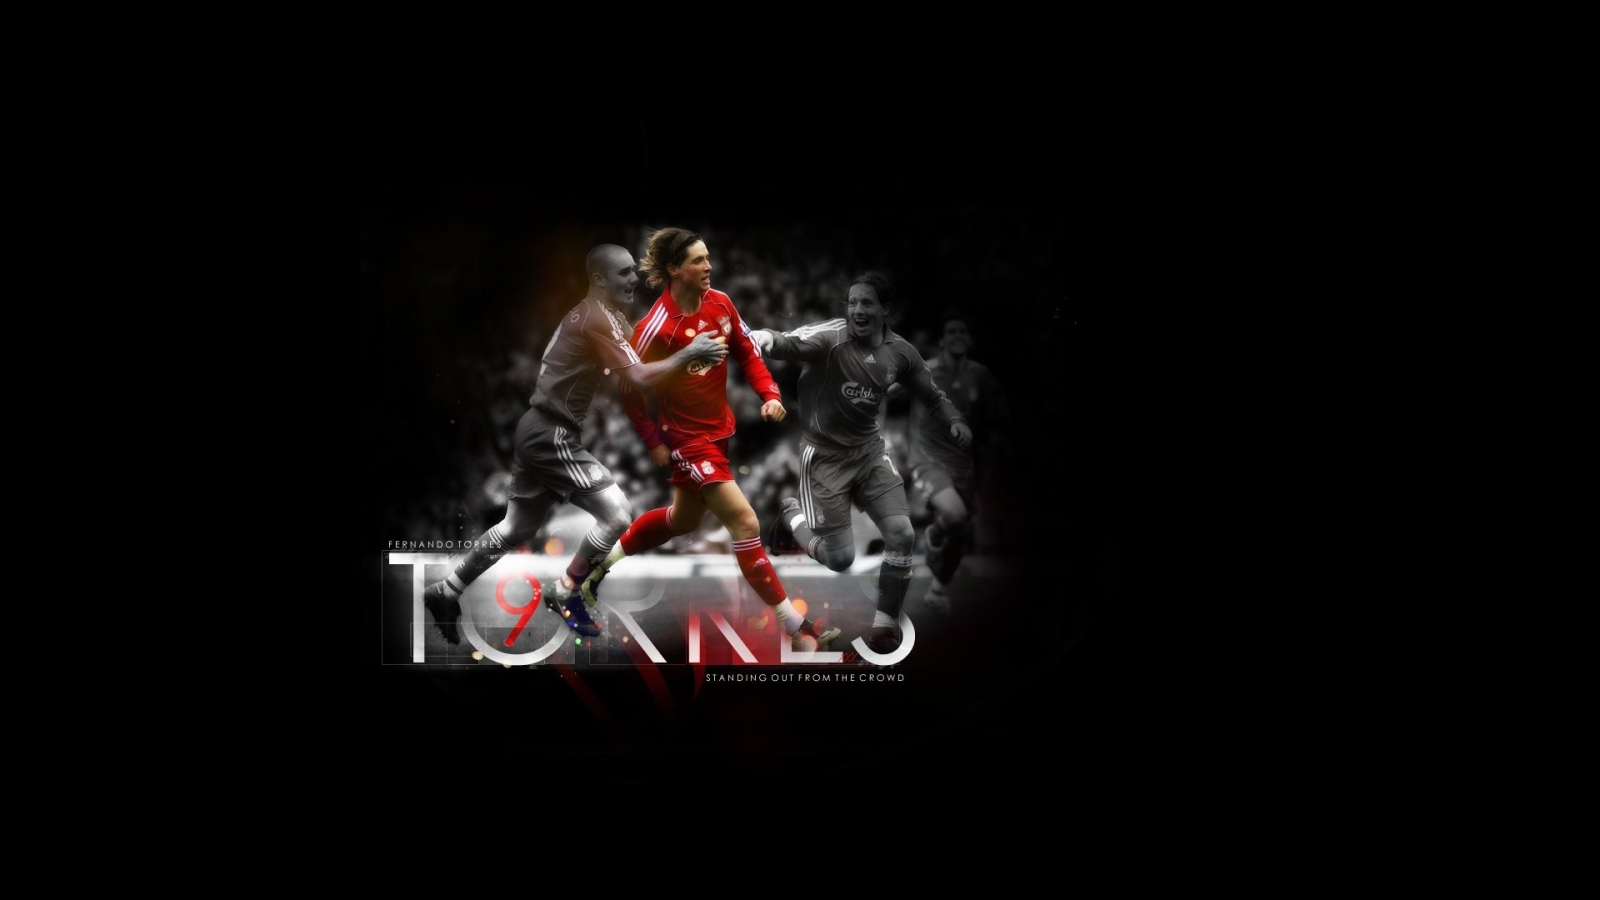 Fernando Torres playing for 1600 x 900 HDTV resolution